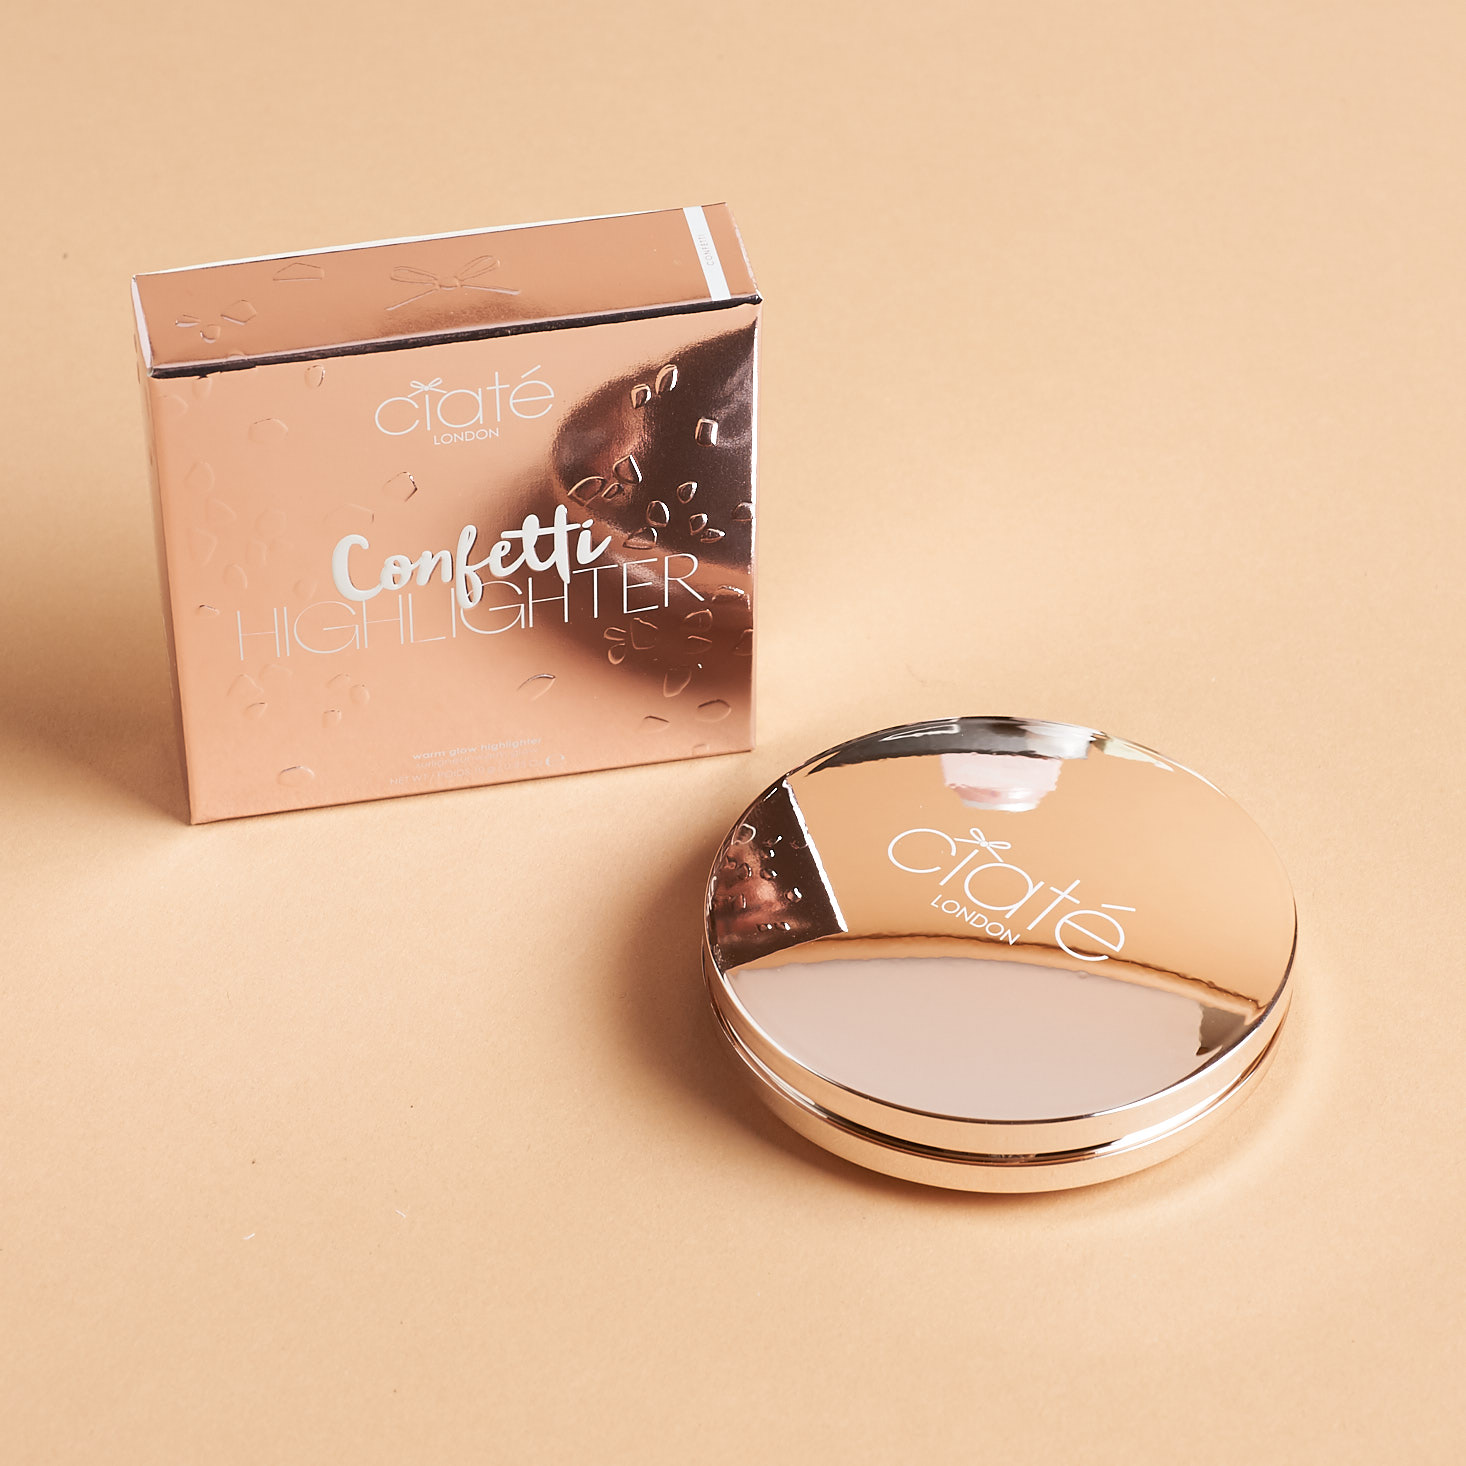 metallic rose gold compact with confetti ptterned highlighter inside